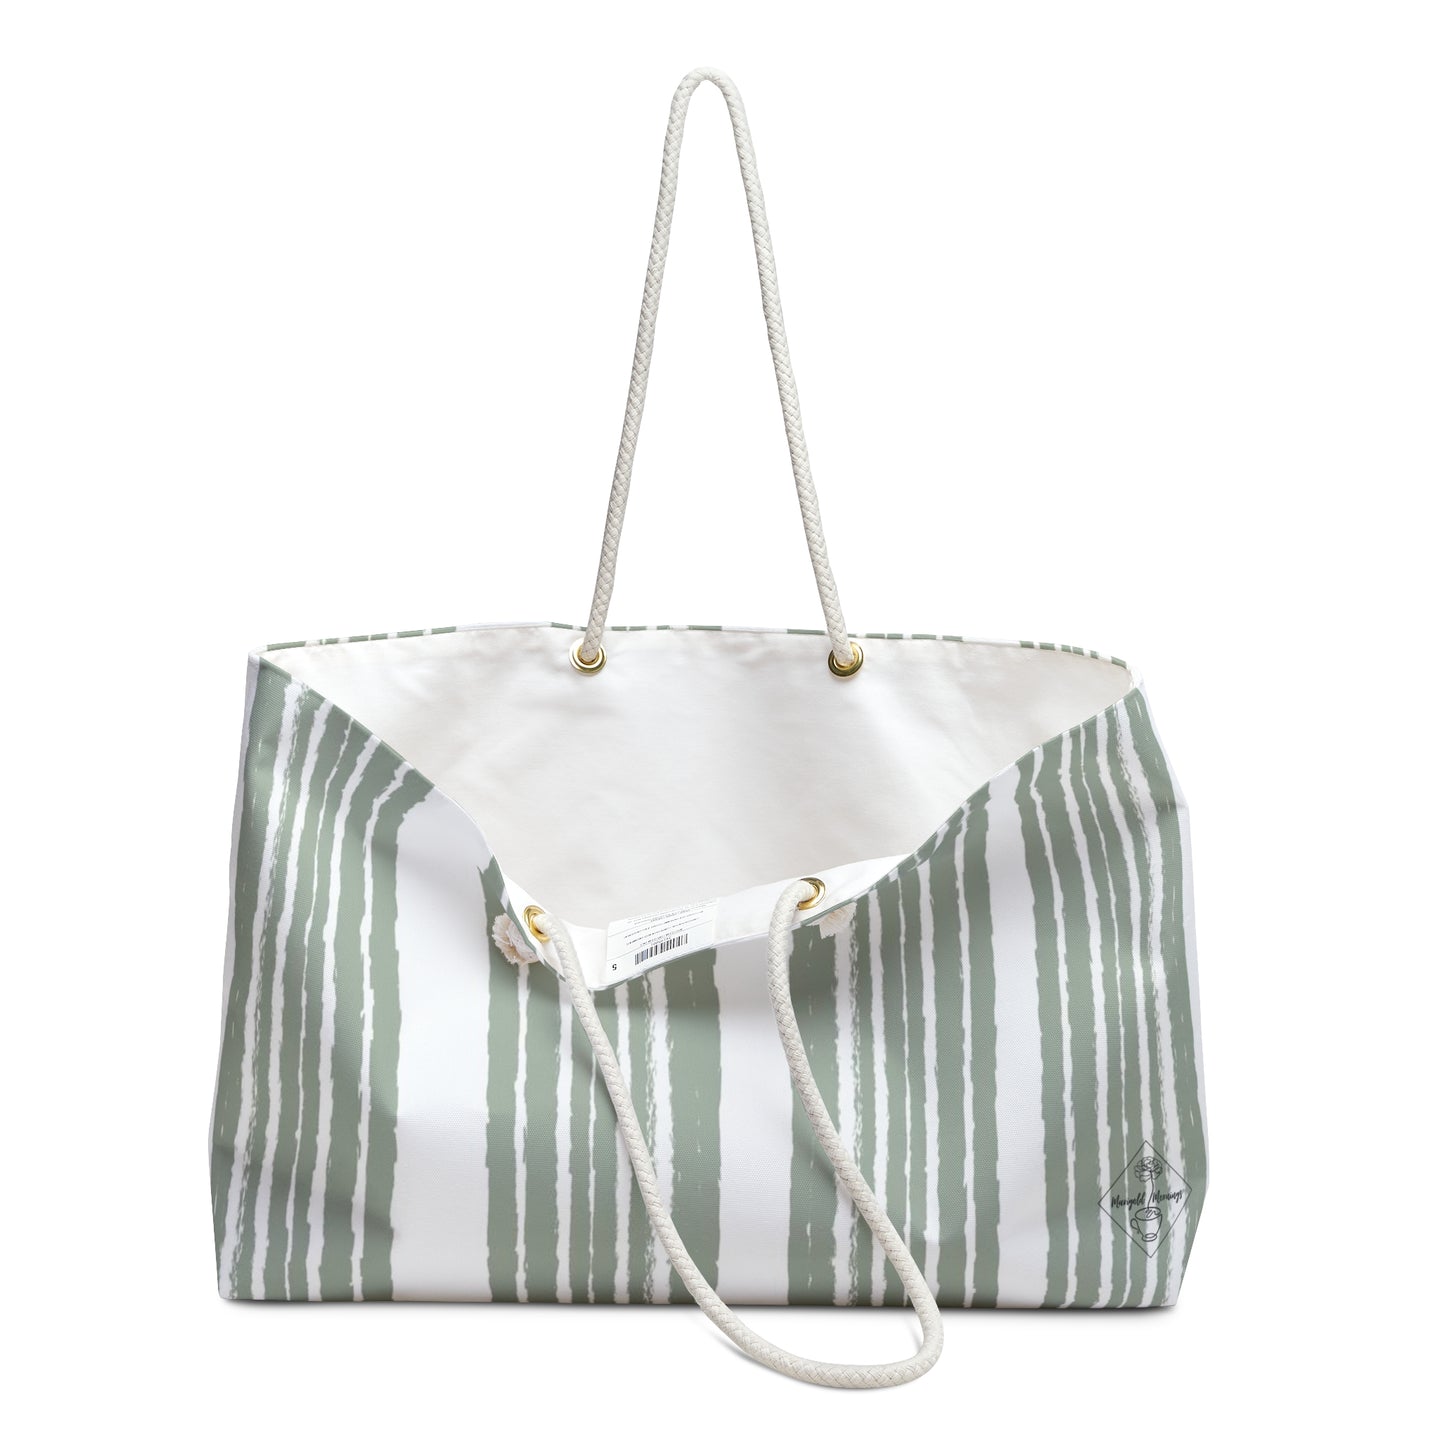 Everything Tote (Green Stripe)